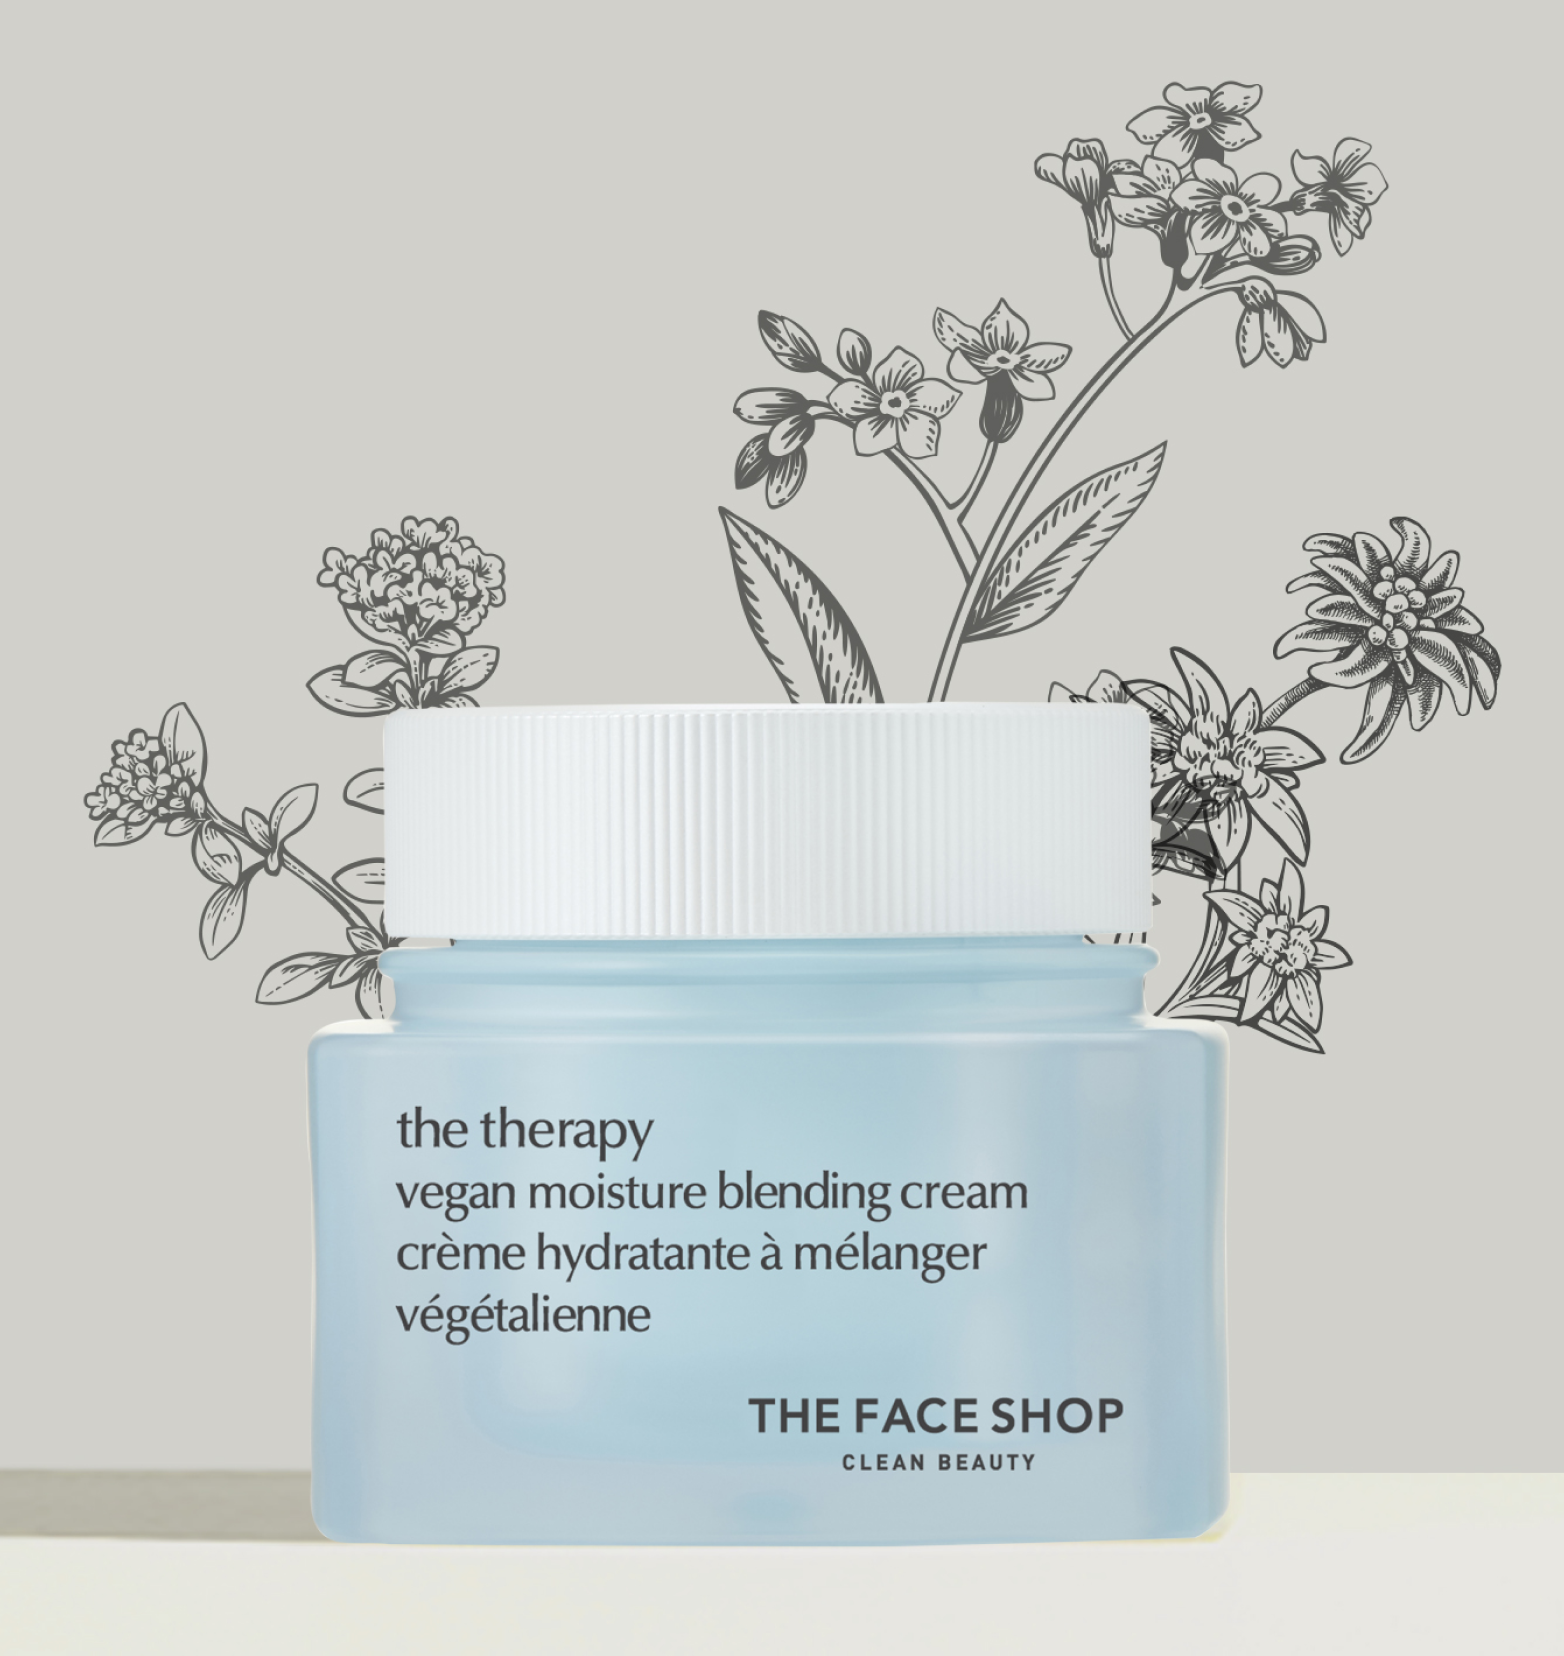 A light blue jar of The Face Shop Vegan Moisture Blending Cream standing on a beige background with a  drawing of flowers